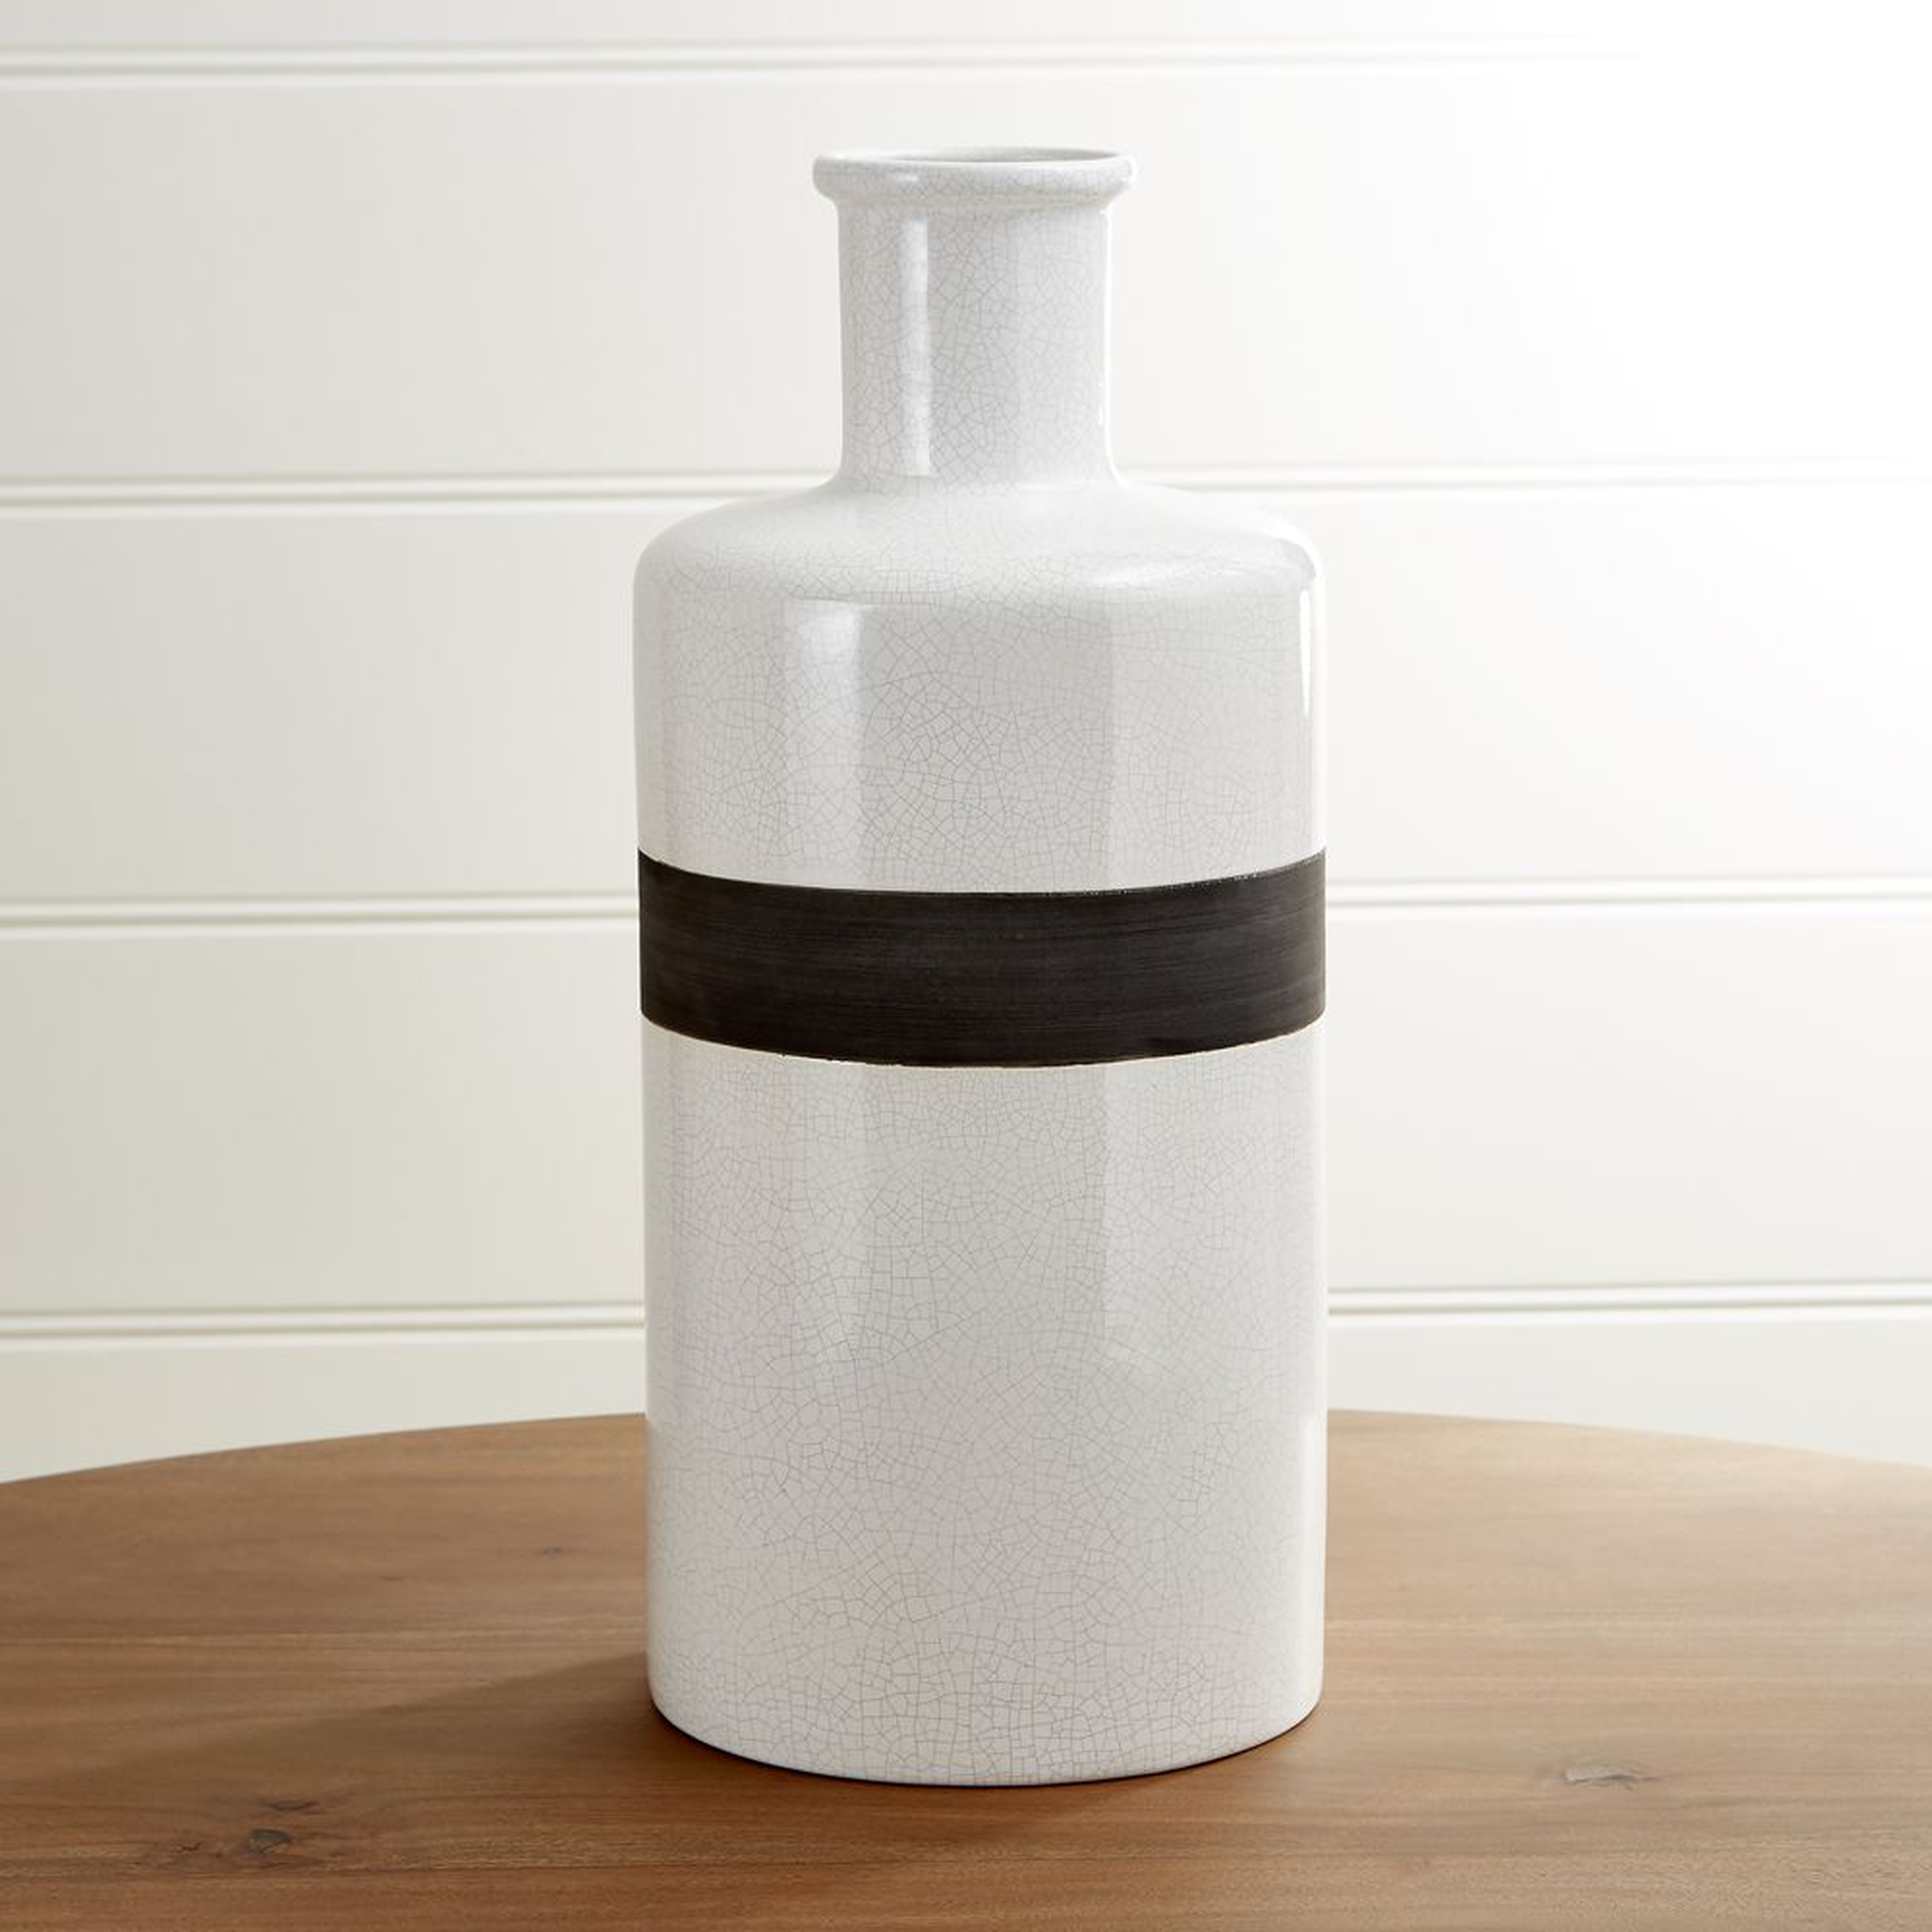 Douro Tall Vase - Crate and Barrel